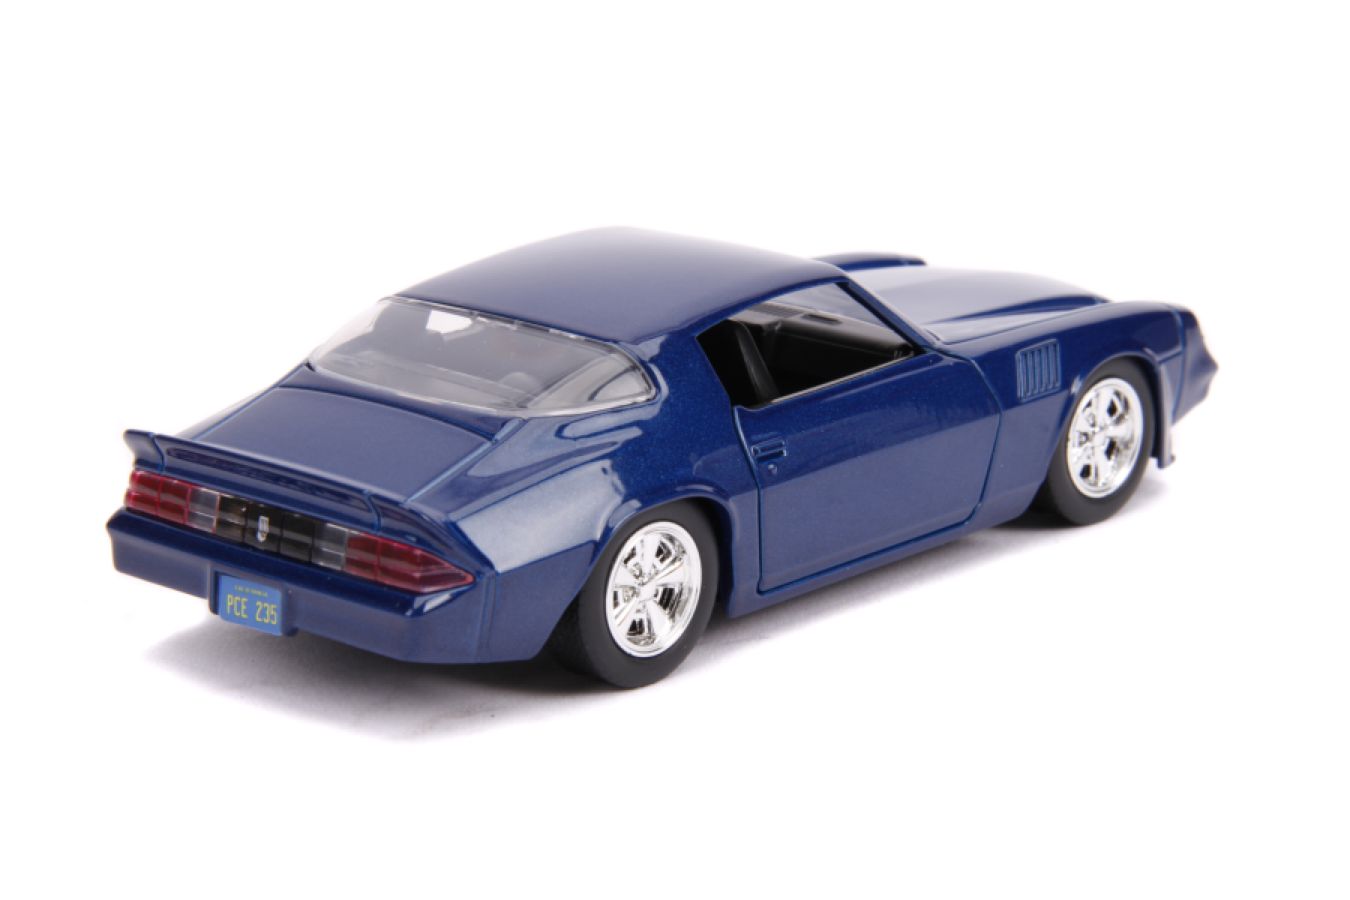 Stranger Things - 1979 Chevy Camero Z28 1:32 Hollywood Ride